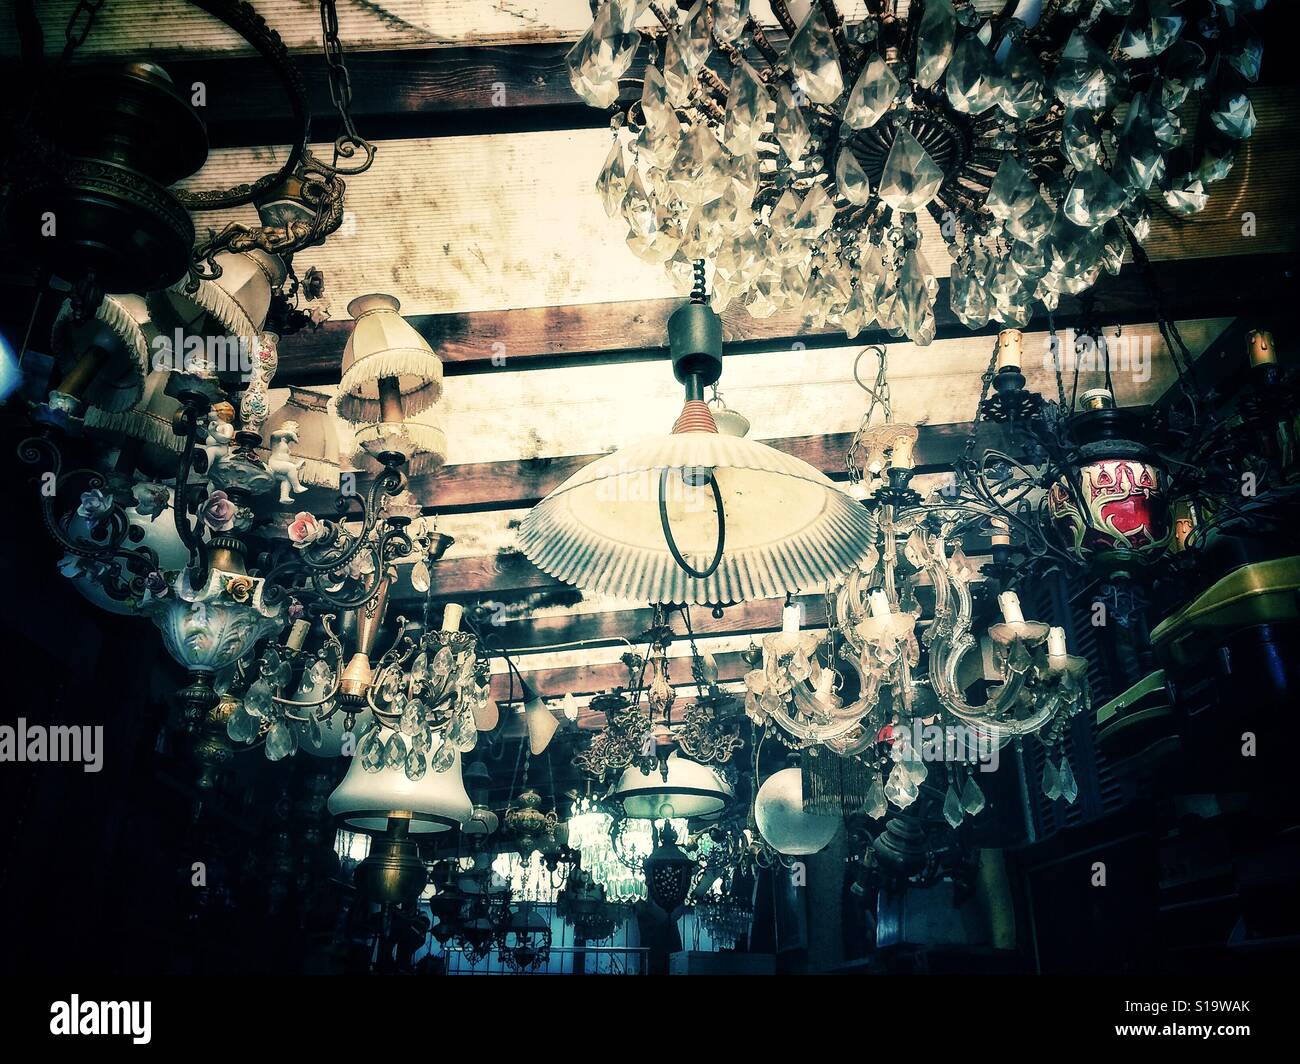 Light fixtures on display in an antique shop Stock Photo